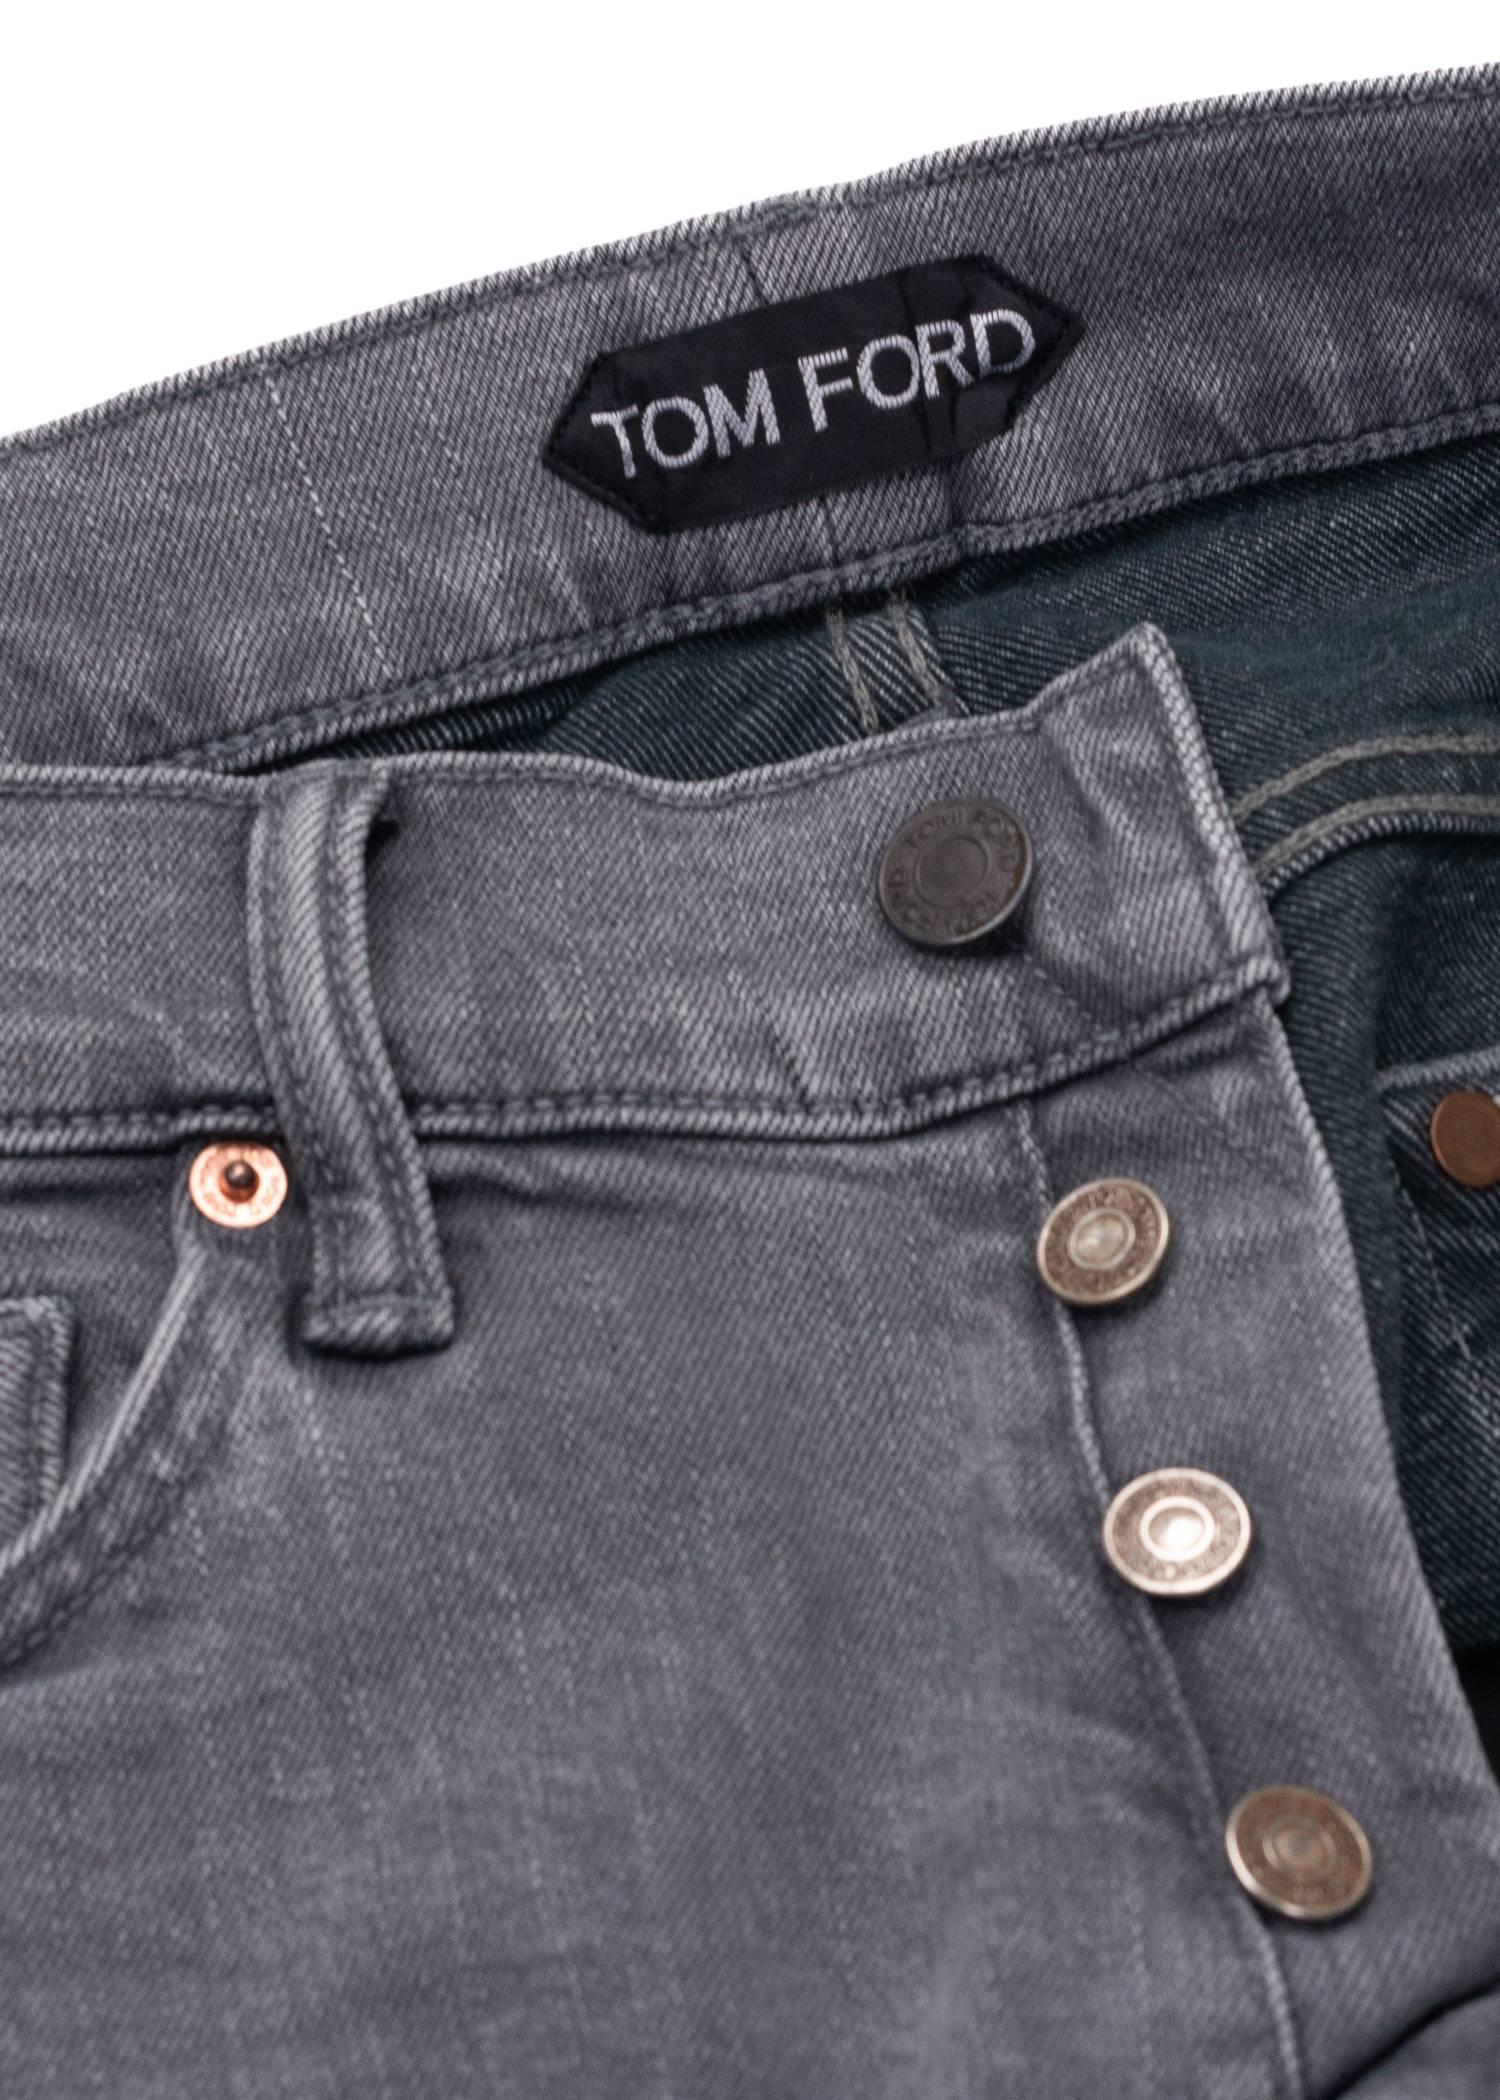 Gray Tom Ford Selvedge Denim Jeans Medium Grey Wash Size 32 Straight Fit Model   For Sale